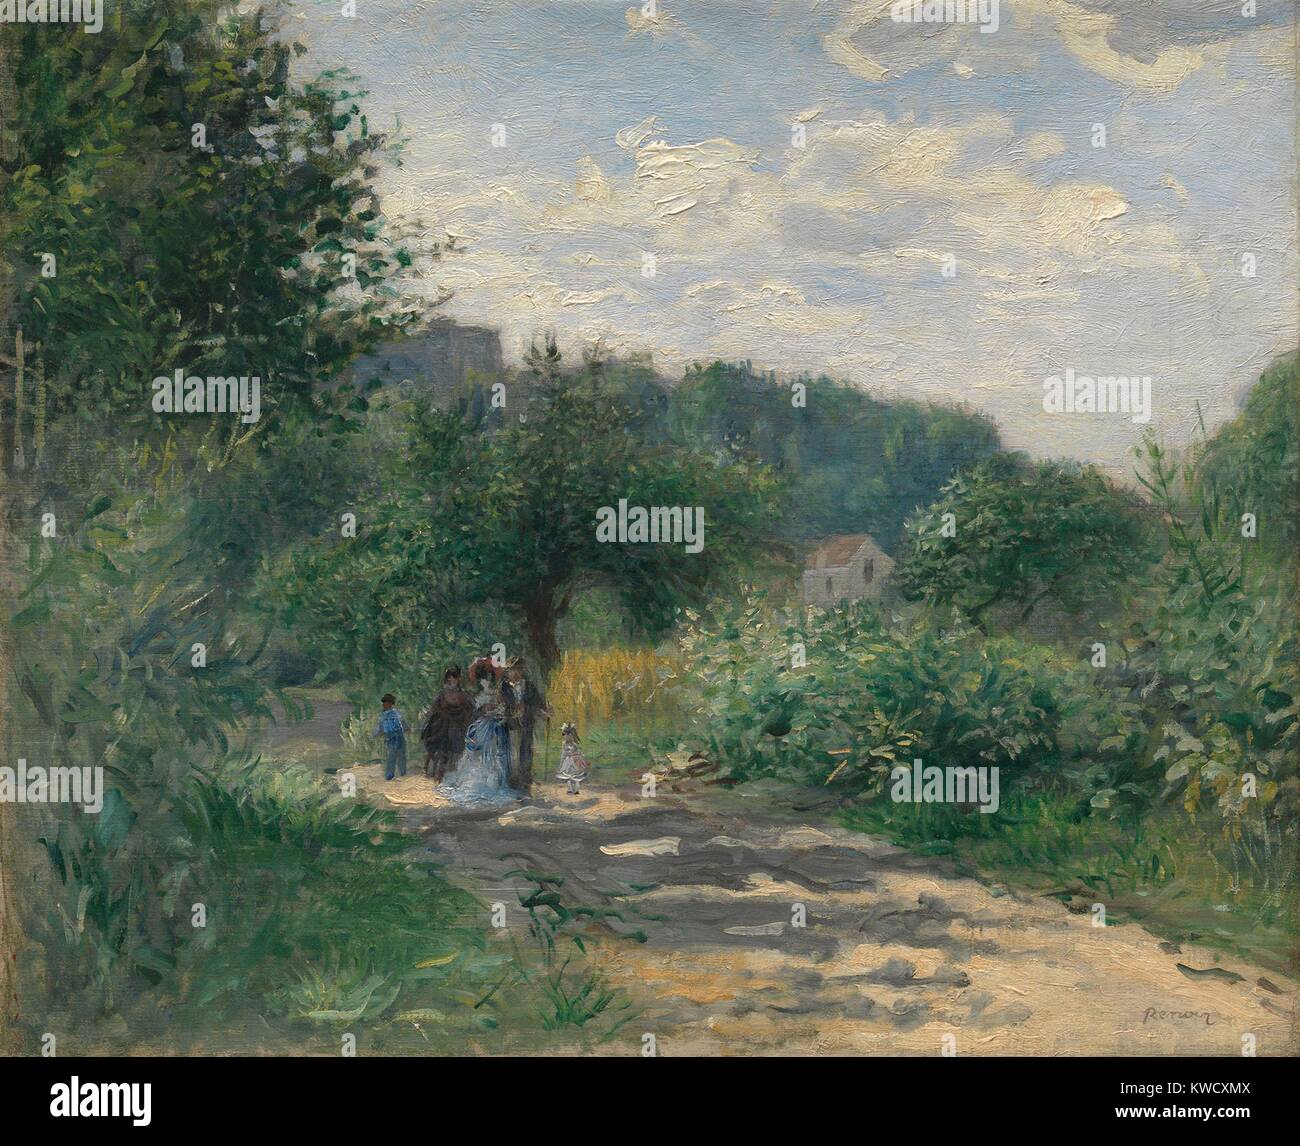 A Road in Louveciennes, by Auguste Renoir, 1870, French impressionist painting, oil on canvas. This early impressionist landscape has rich fresh greens painted with rhythmically active brushwork (BSLOC 2017 3 68) Stock Photo